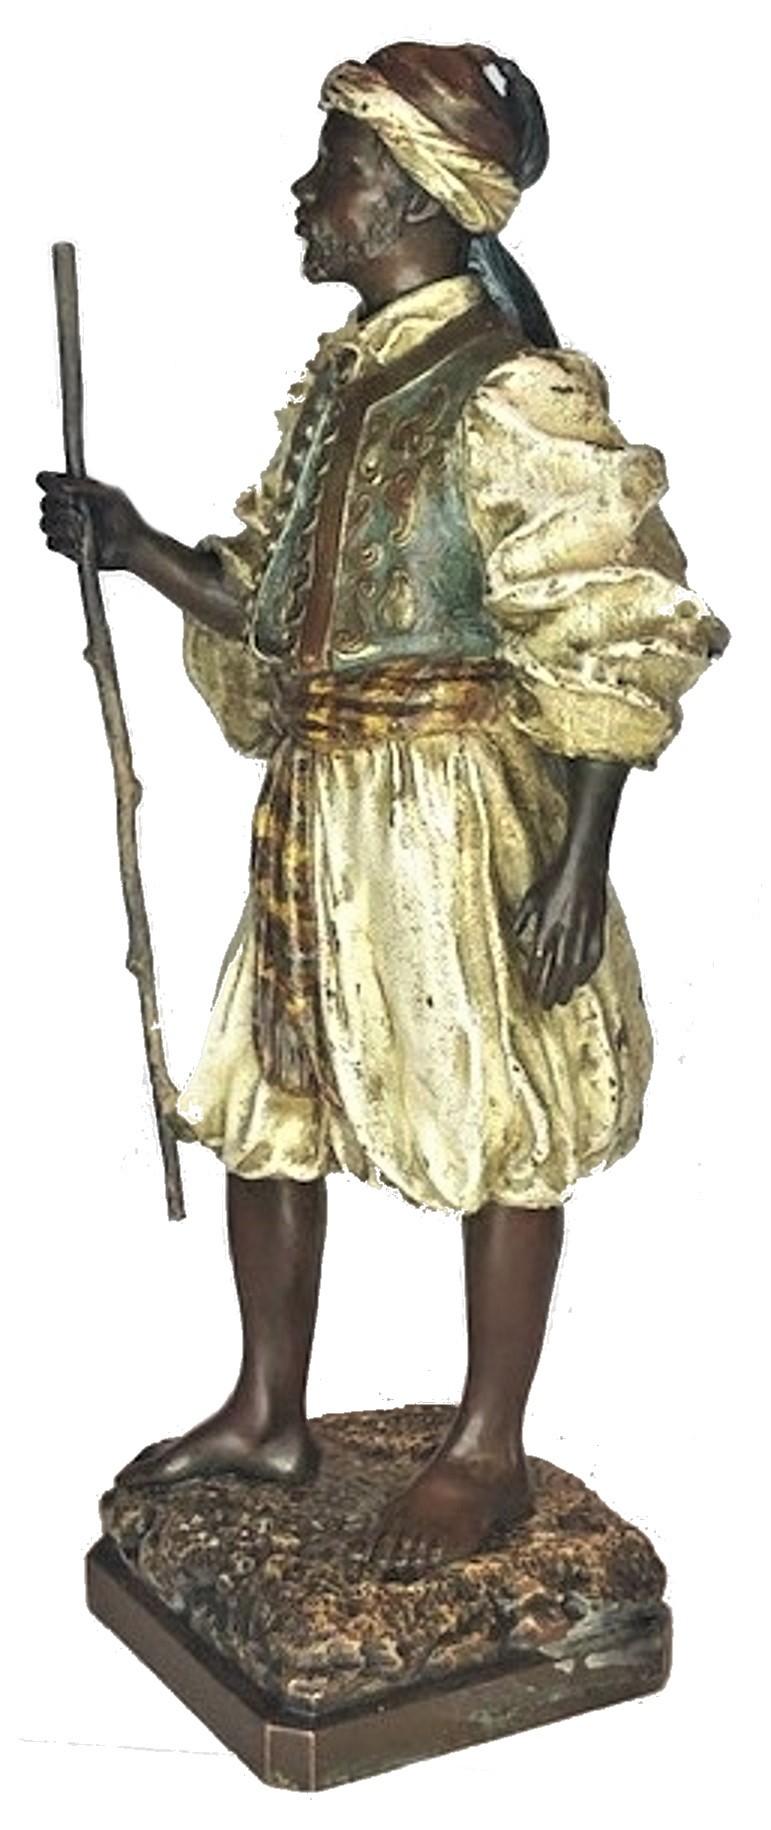 Artist: Franz Xaver Bergmann

Sculpture: Moorish Traveler with Staff

This wonderful life-like sculpture depicts a Moorish traveler in a historical costume, with a staff in his hand. It is created in polychrome cold-painted bronze, and rendered